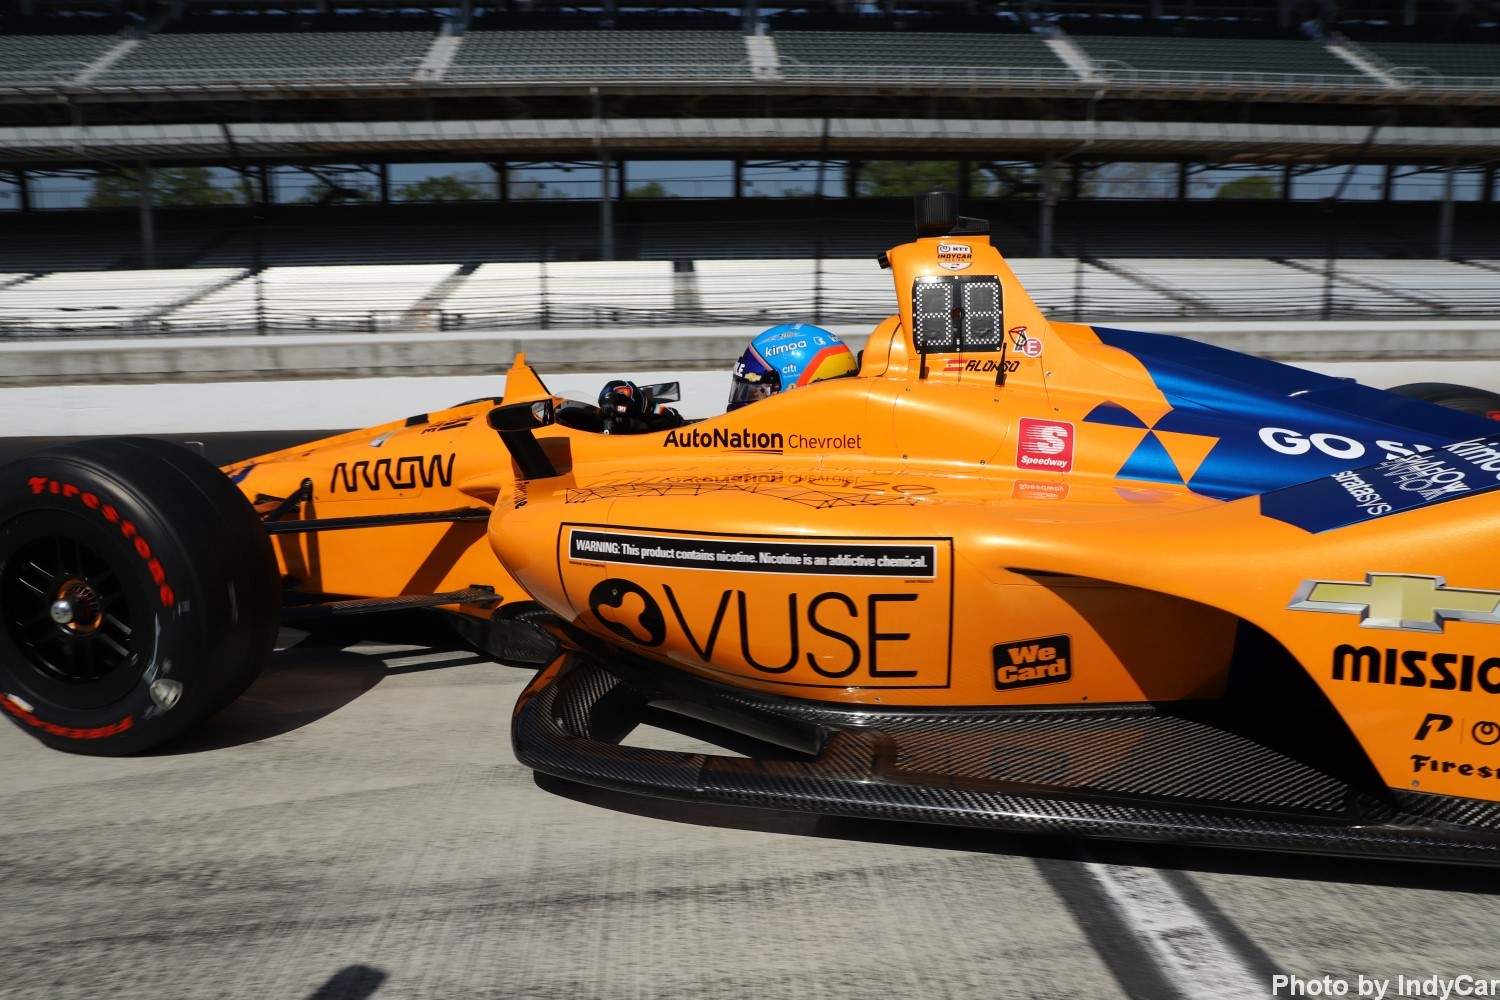 Vuse was prominent on Fernando Alonso's car at Indy in 2019